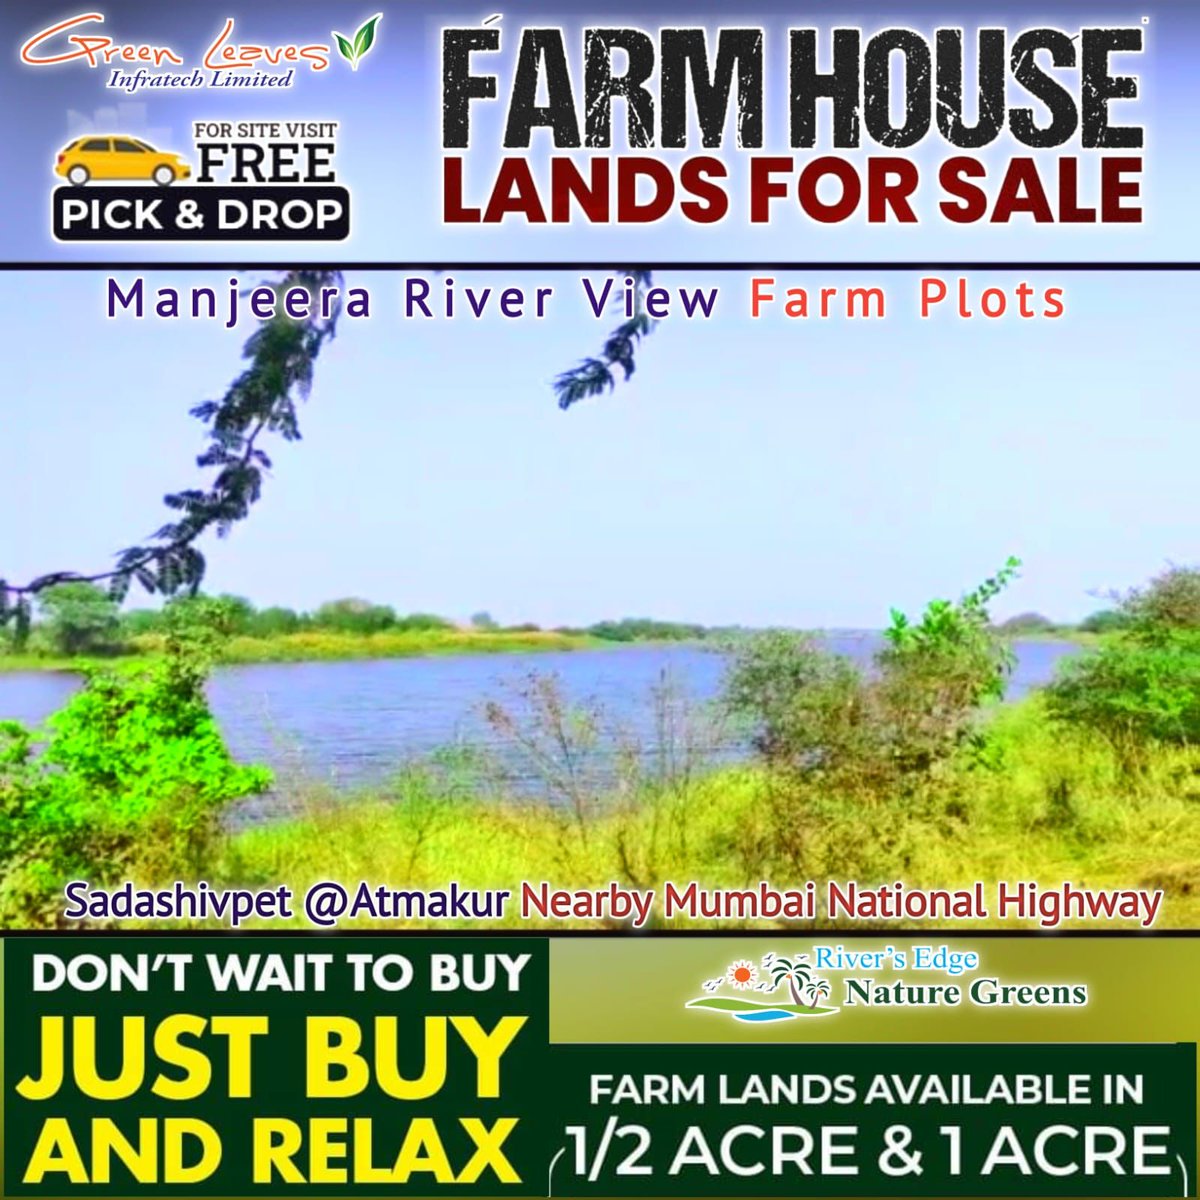 Investors and buyers !
Plz call ☎️ us now for our
Low price offer on farmplots and farmhouses🏡
We arrange cab for free pickup and dropping to visit our venture 🚗
Tomorrow
More details contact us 7842352640
@Bairi999